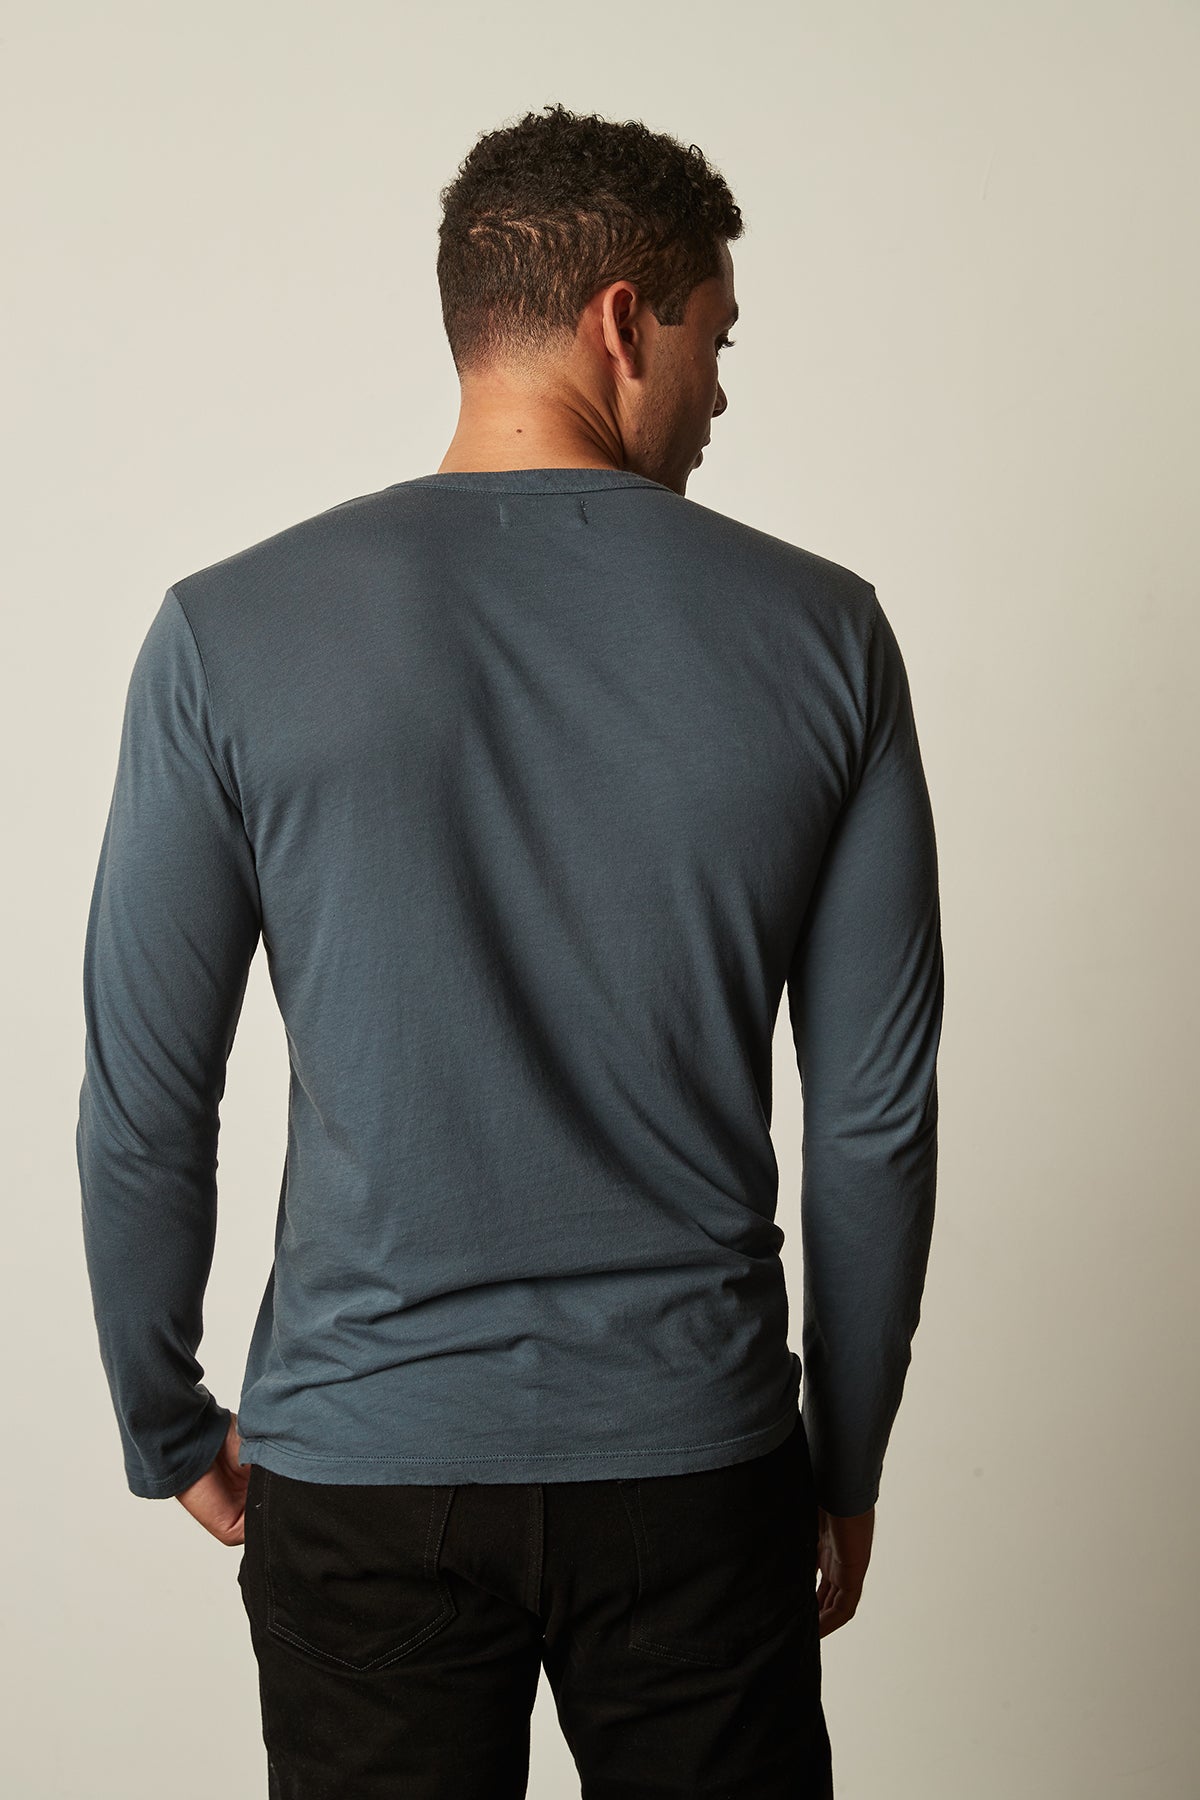 the back view of a man wearing a Velvet by Graham & Spencer ALVARO COTTON JERSEY HENLEY blue long sleeve t-shirt.-26629718409409